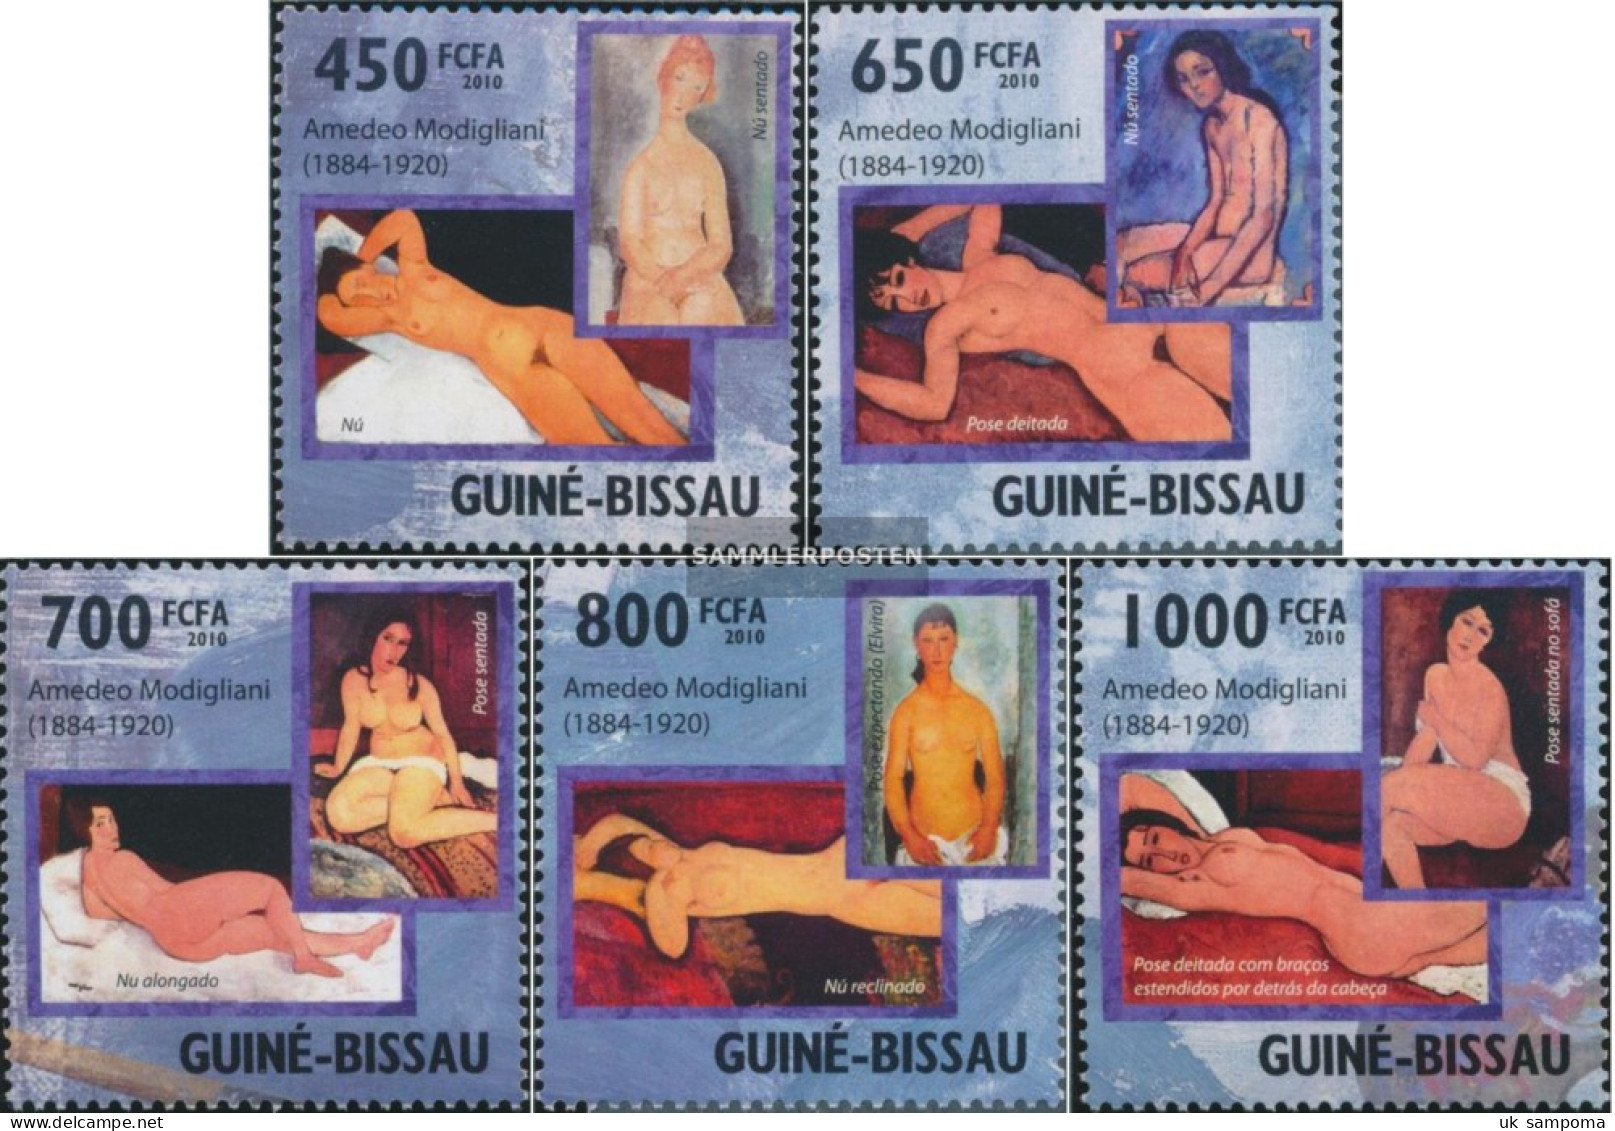 Guinea-Bissau 4605-4609 (complete. Issue) Unmounted Mint / Never Hinged 2010 Amedeo Modigliani - Guinée-Bissau